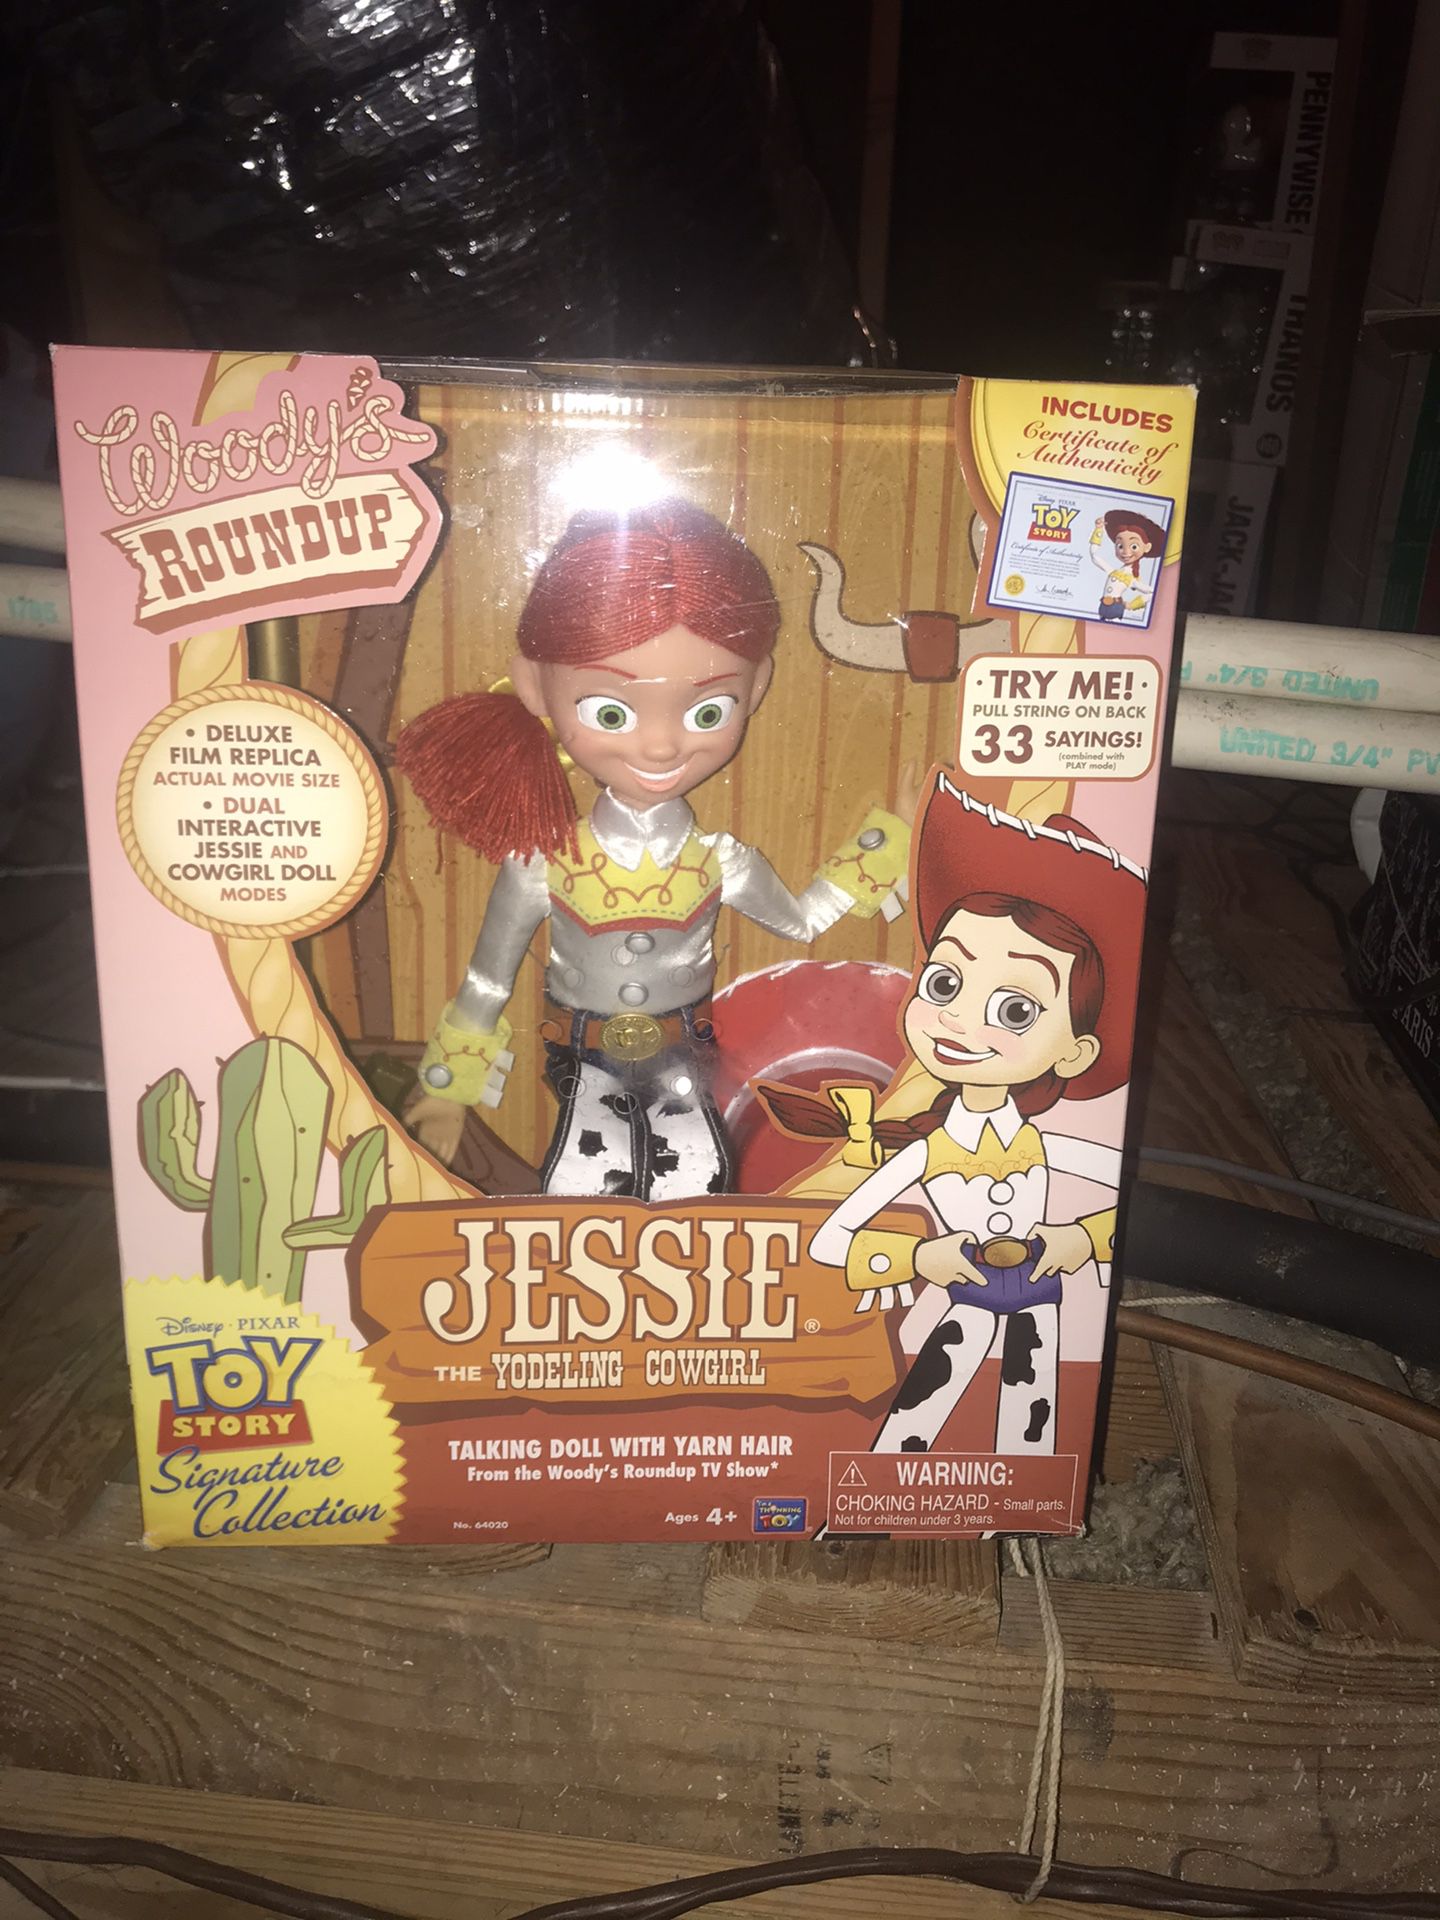 Jessie toy story signature collection